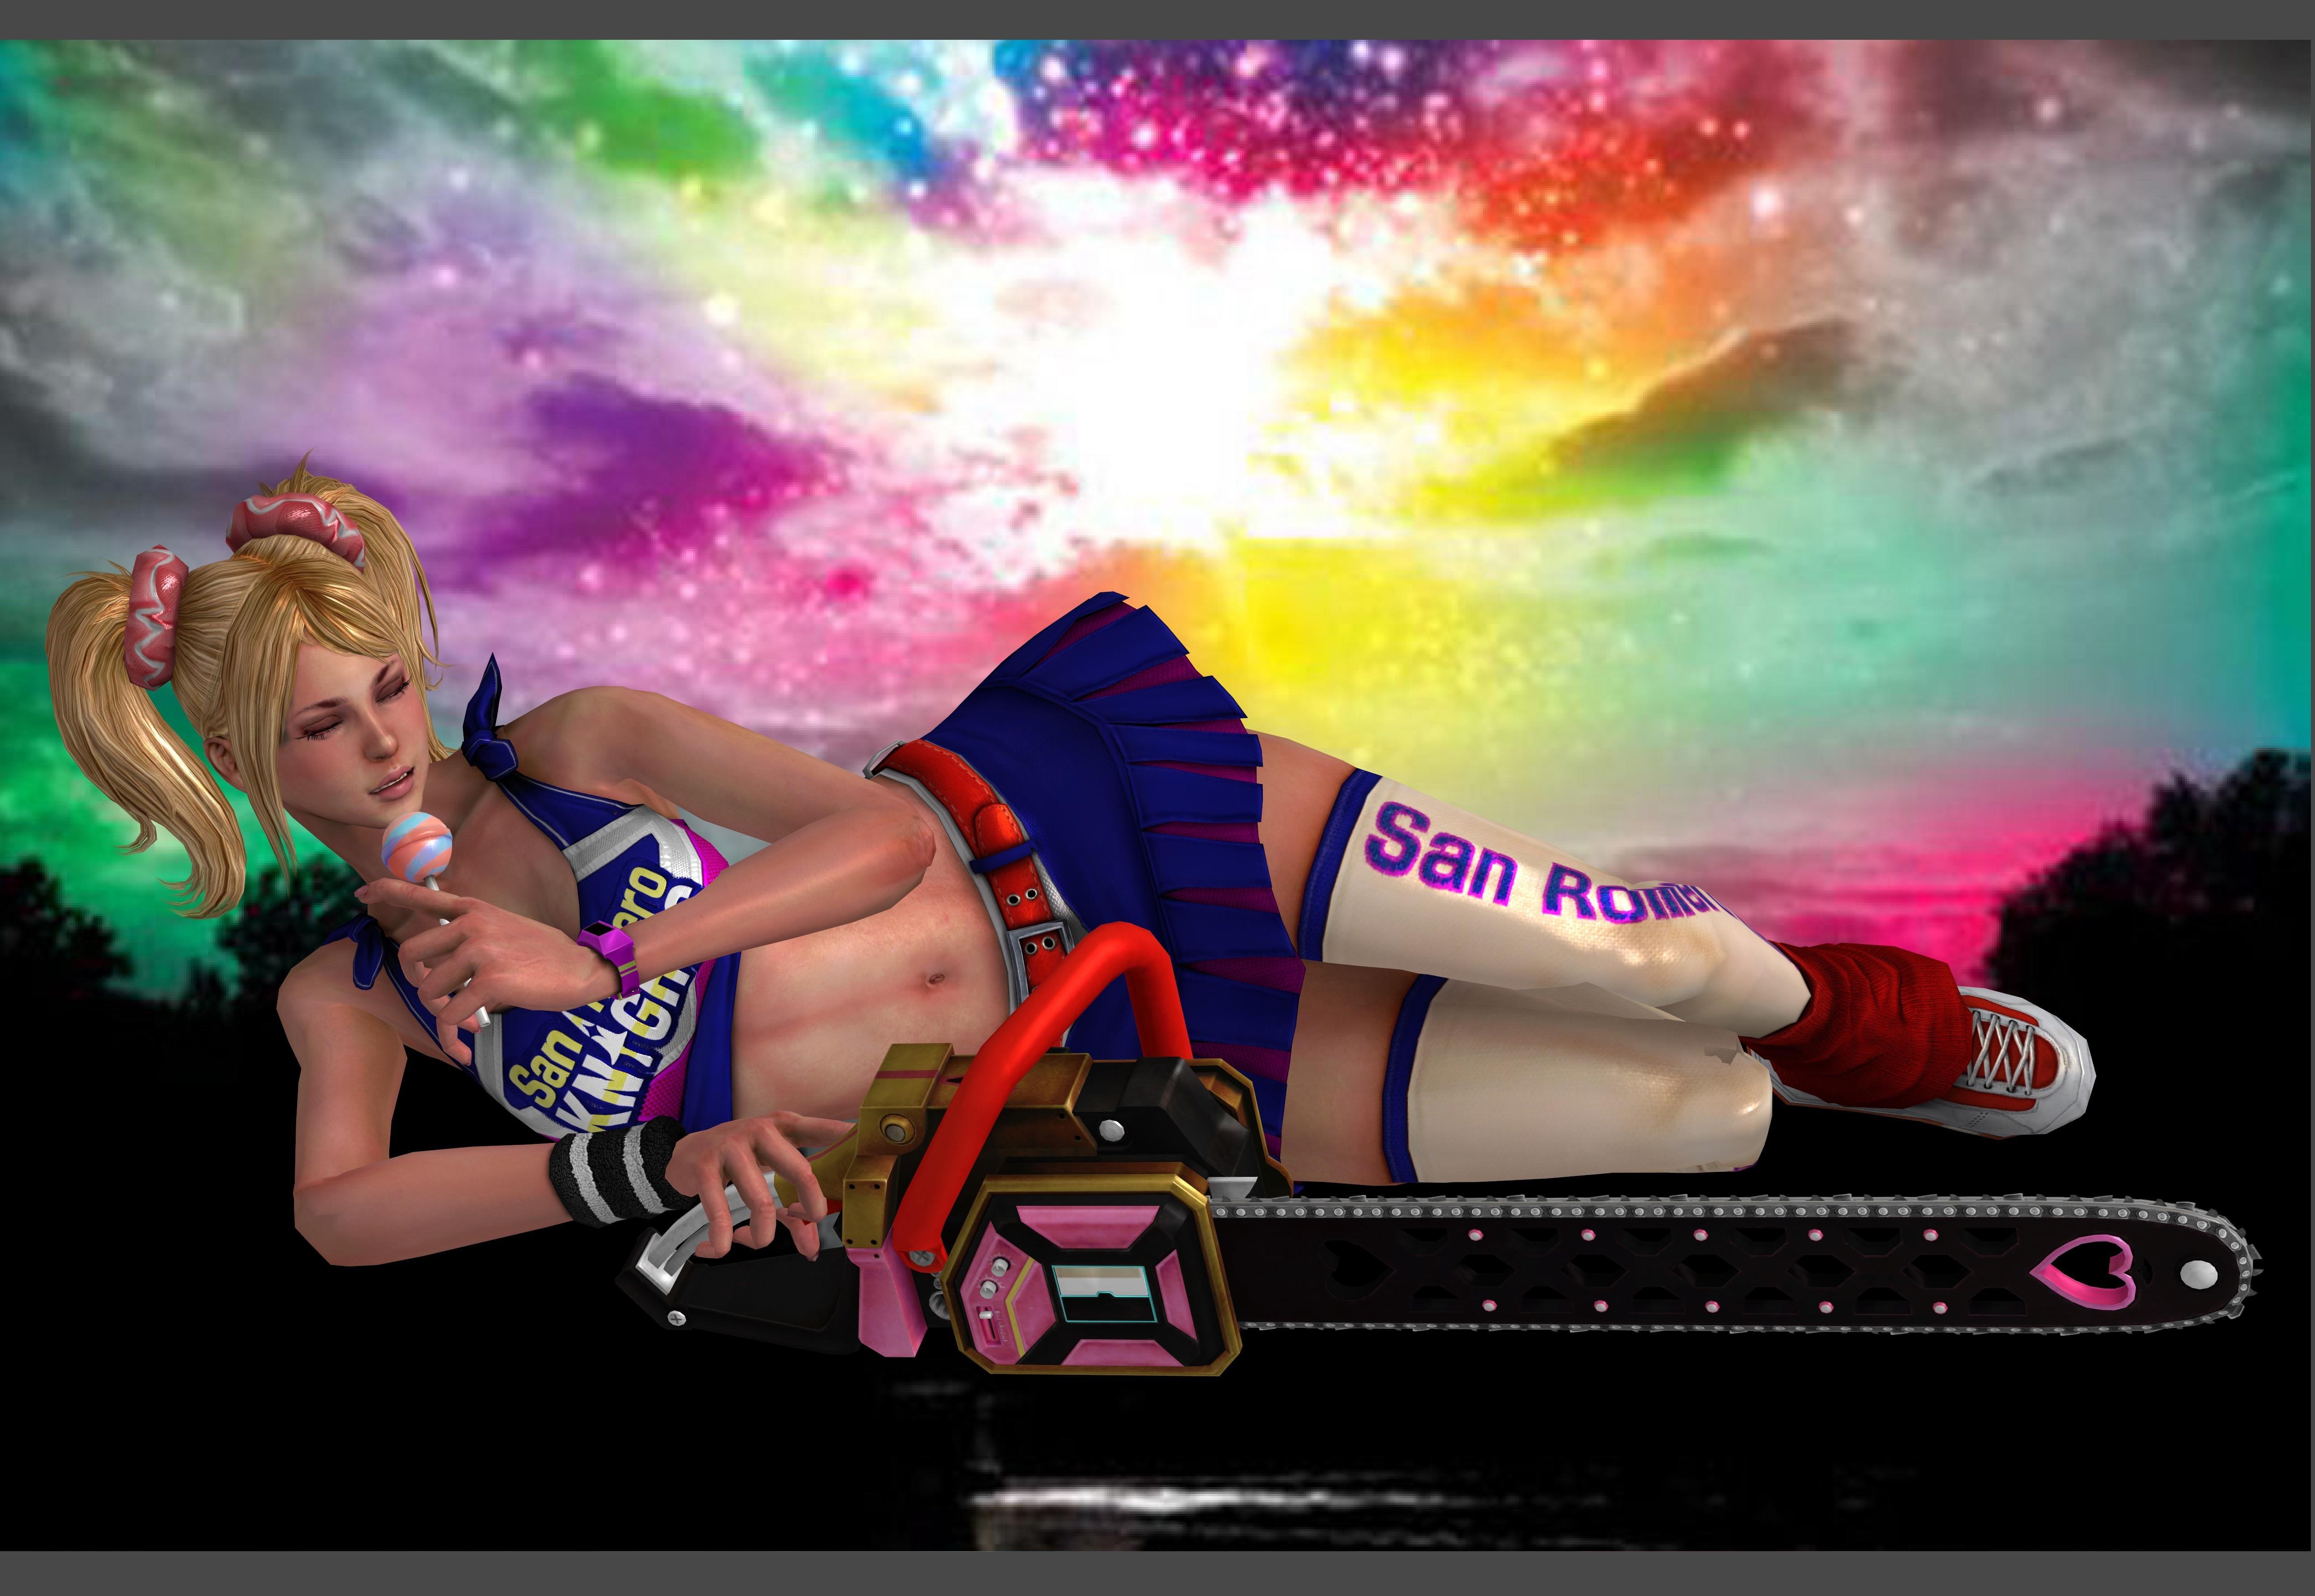 lollipop chainsaw for pc download